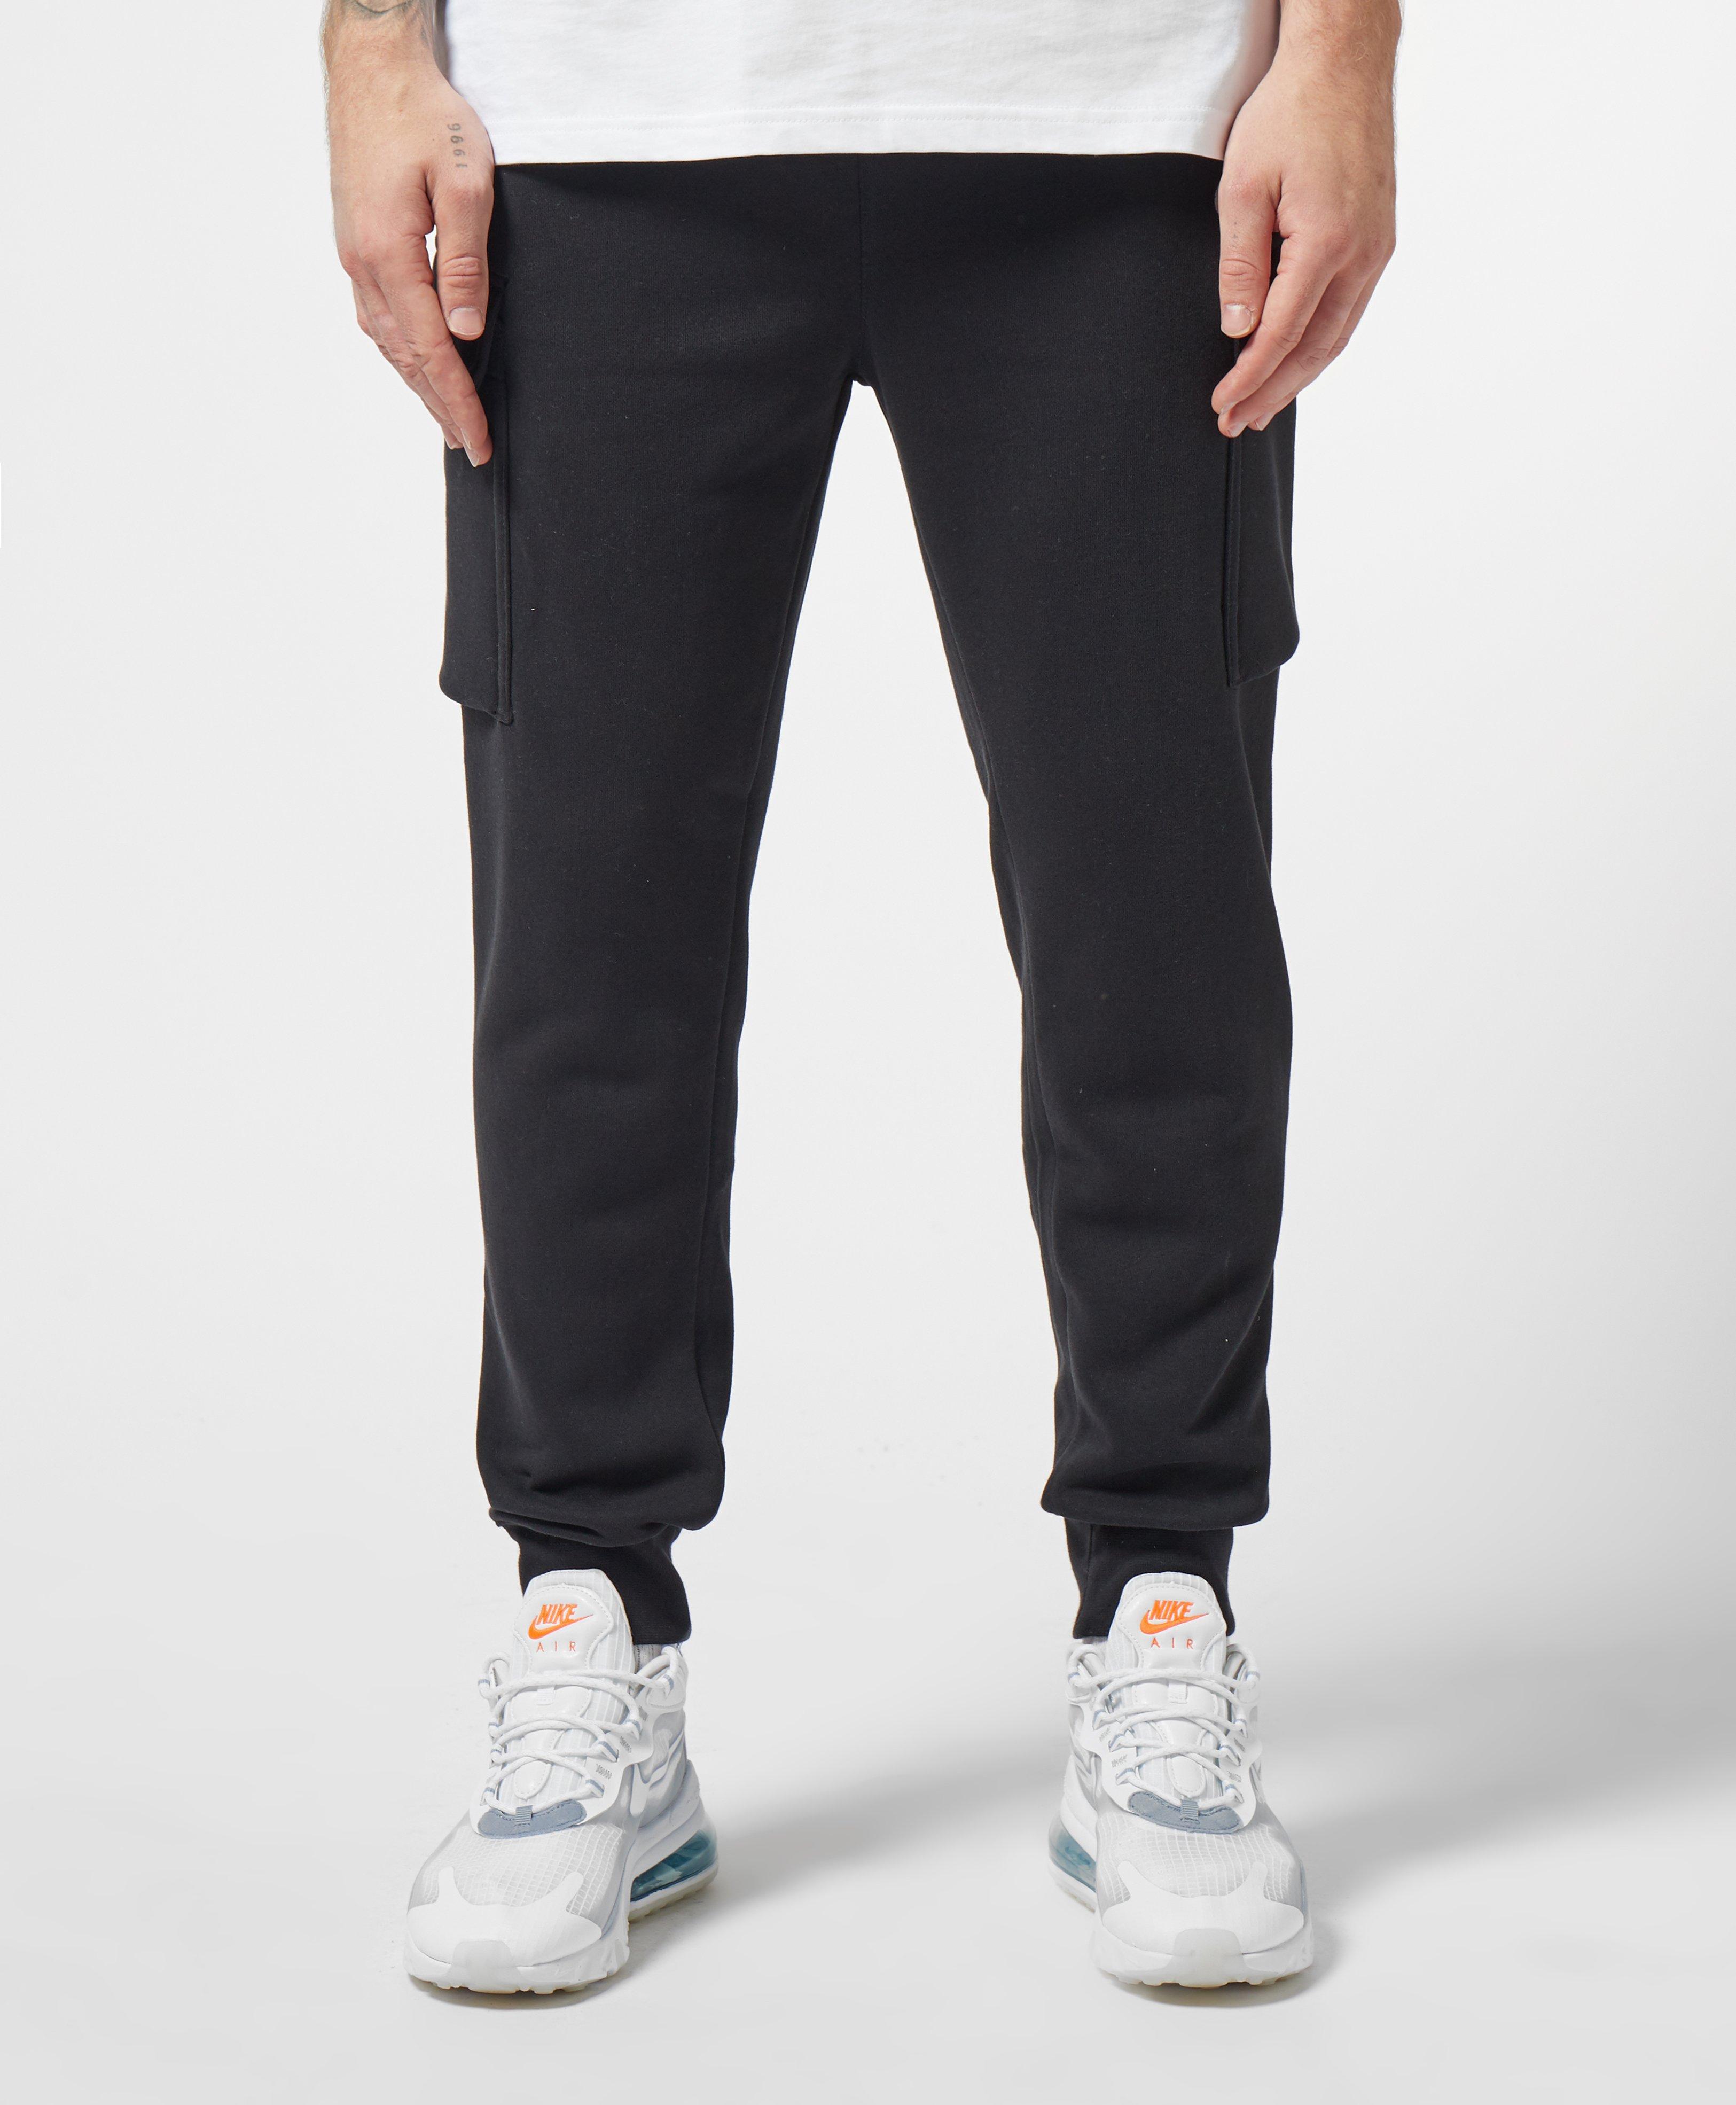 Nike Cotton Foundation Cargo Joggers in Black for Men - Lyst